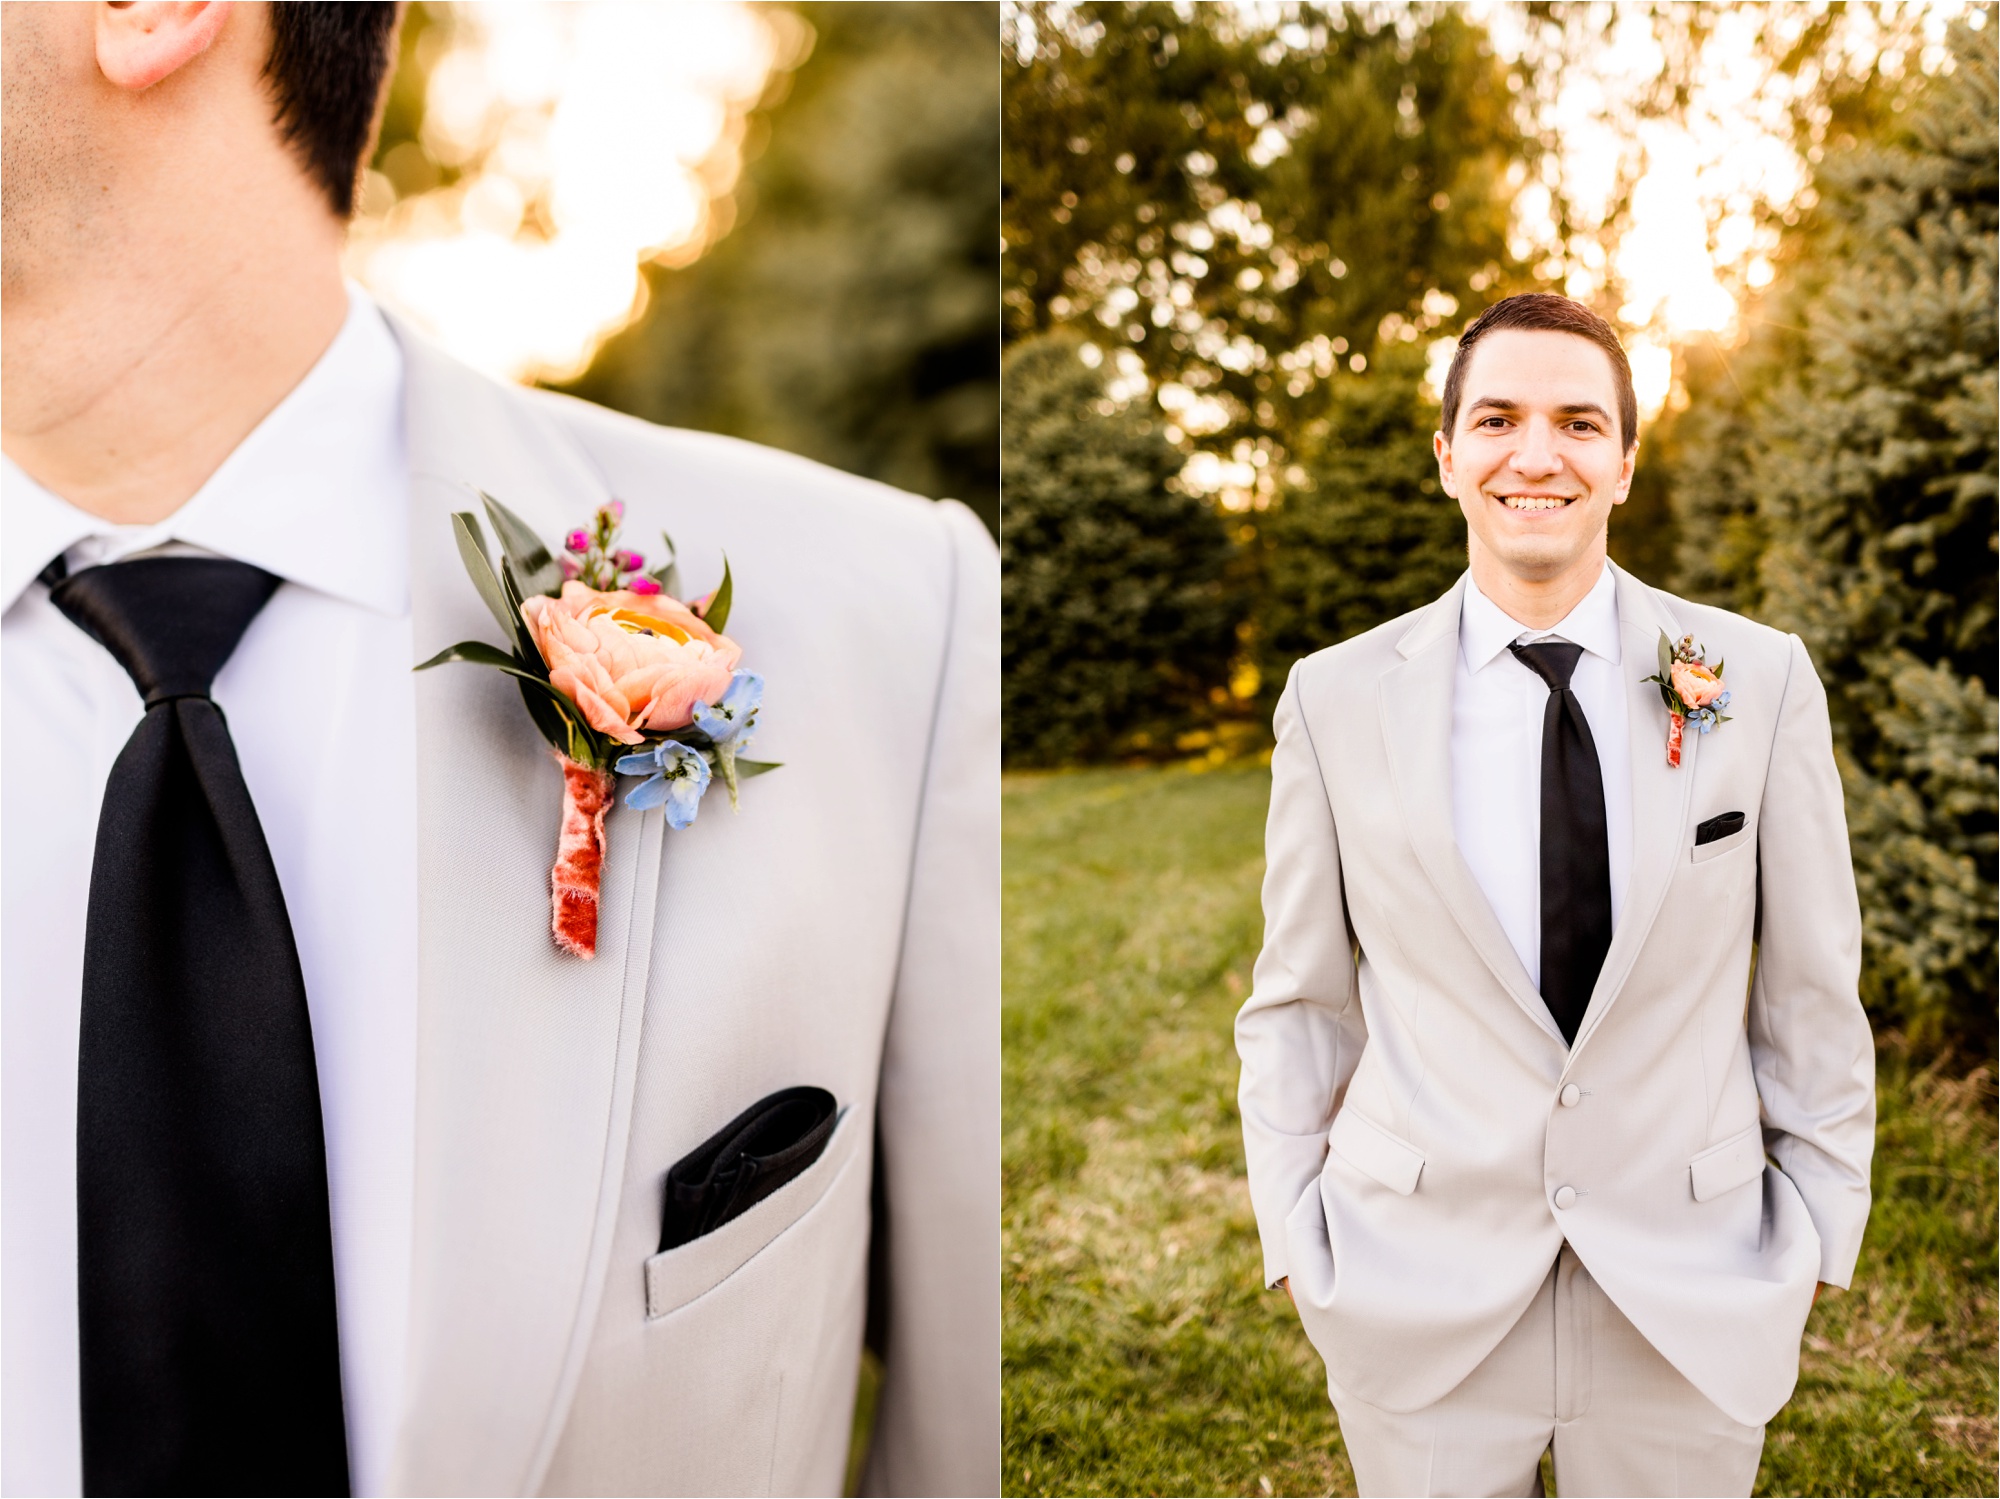 Caitlin and Luke Photography, Illinois Wedding Photographers, Champaign Wedding Photographers, Bloomington Normal Wedding Photographers, Romantic Red and Pink Sunset Styled Shoot_9579.jpg